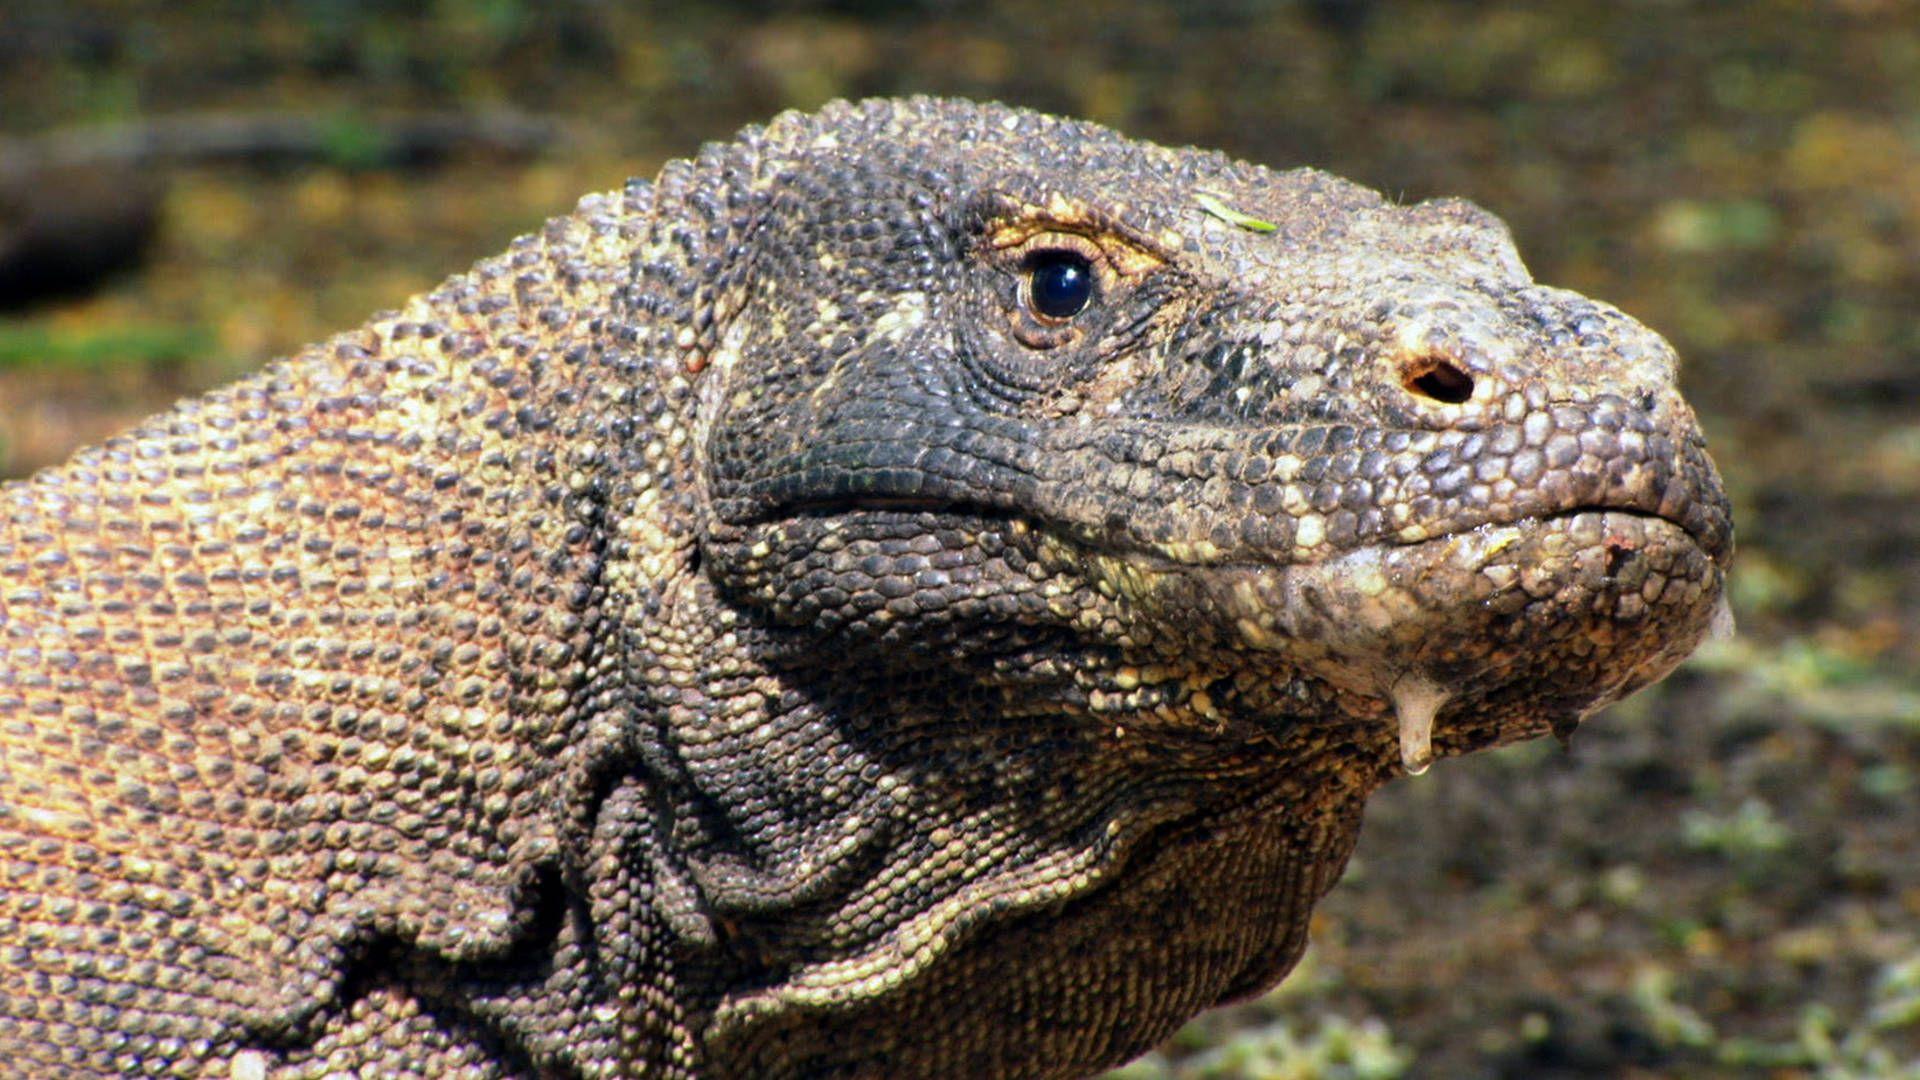 VIDEO: Steps Away From a Hungry Komodo Dragon from Mighty Cruise